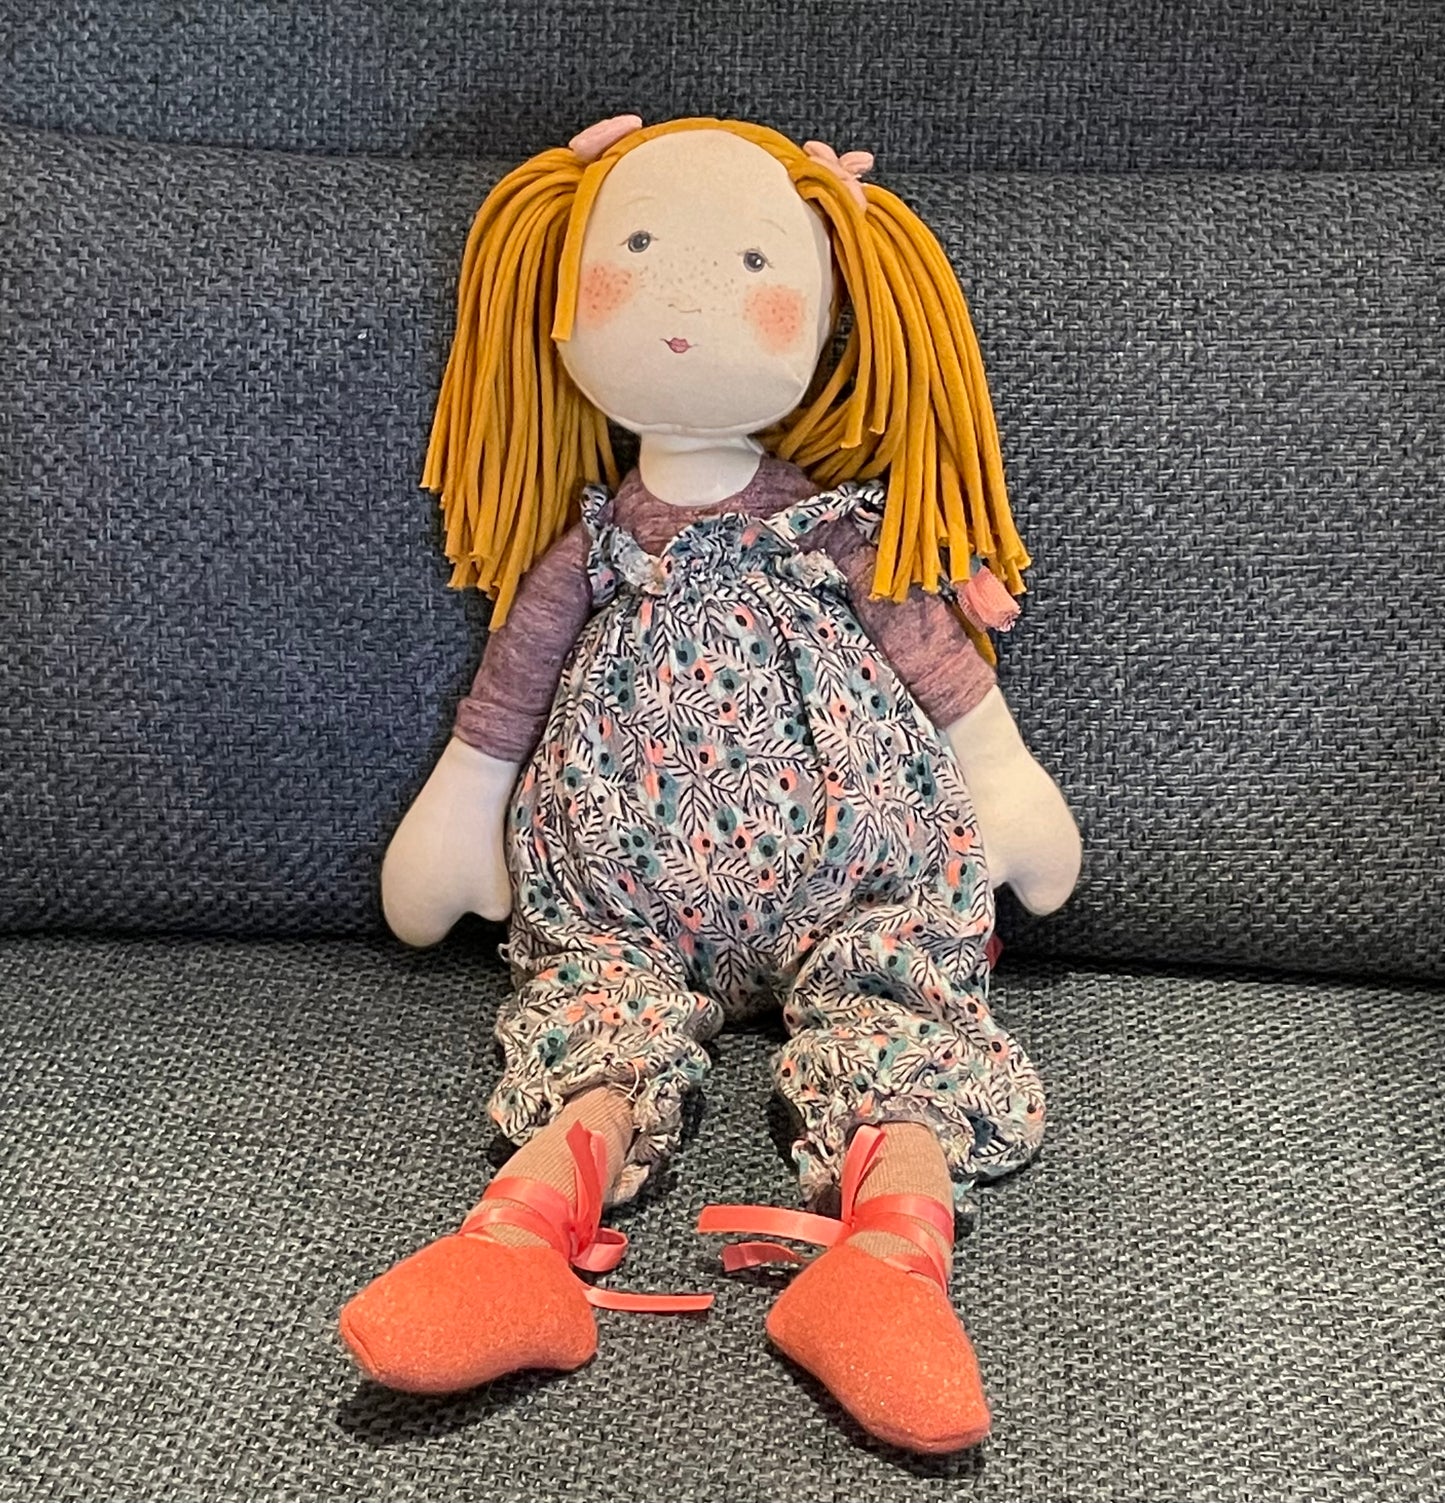 Violette Rag Doll  By Moulin Roty